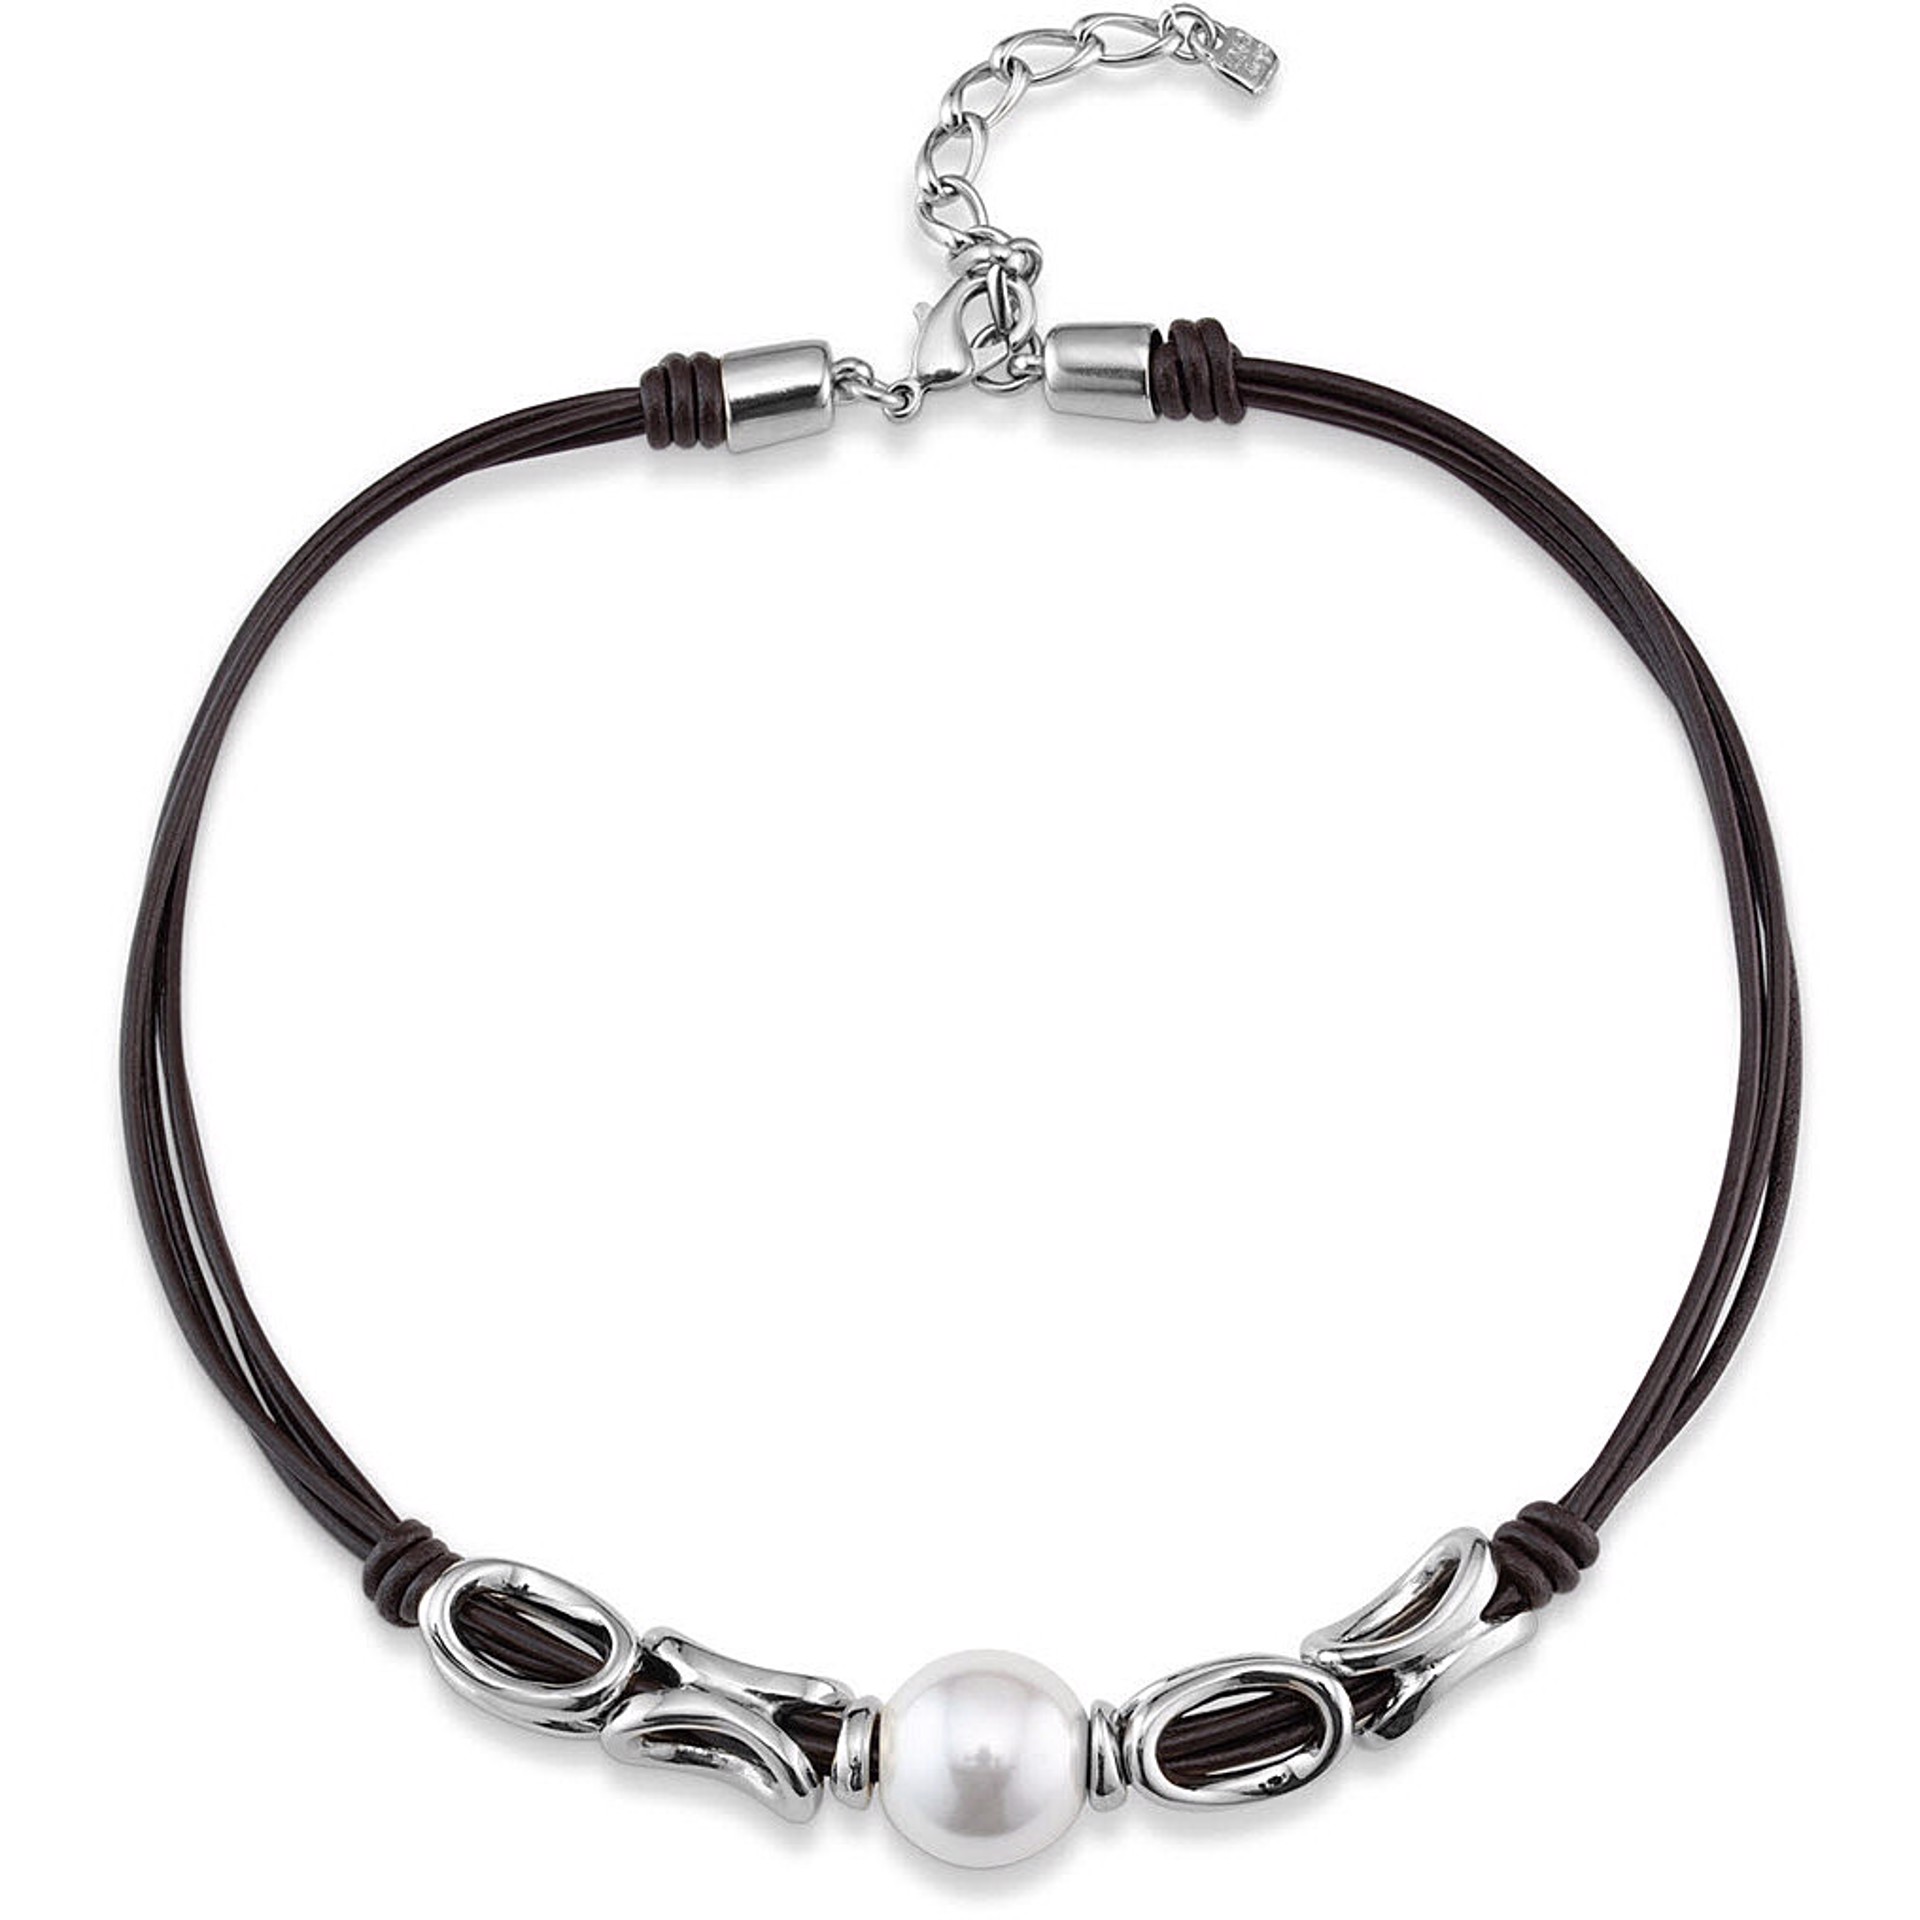 9433 Leather Choker Necklace with Silver Beads by UNO DE 50